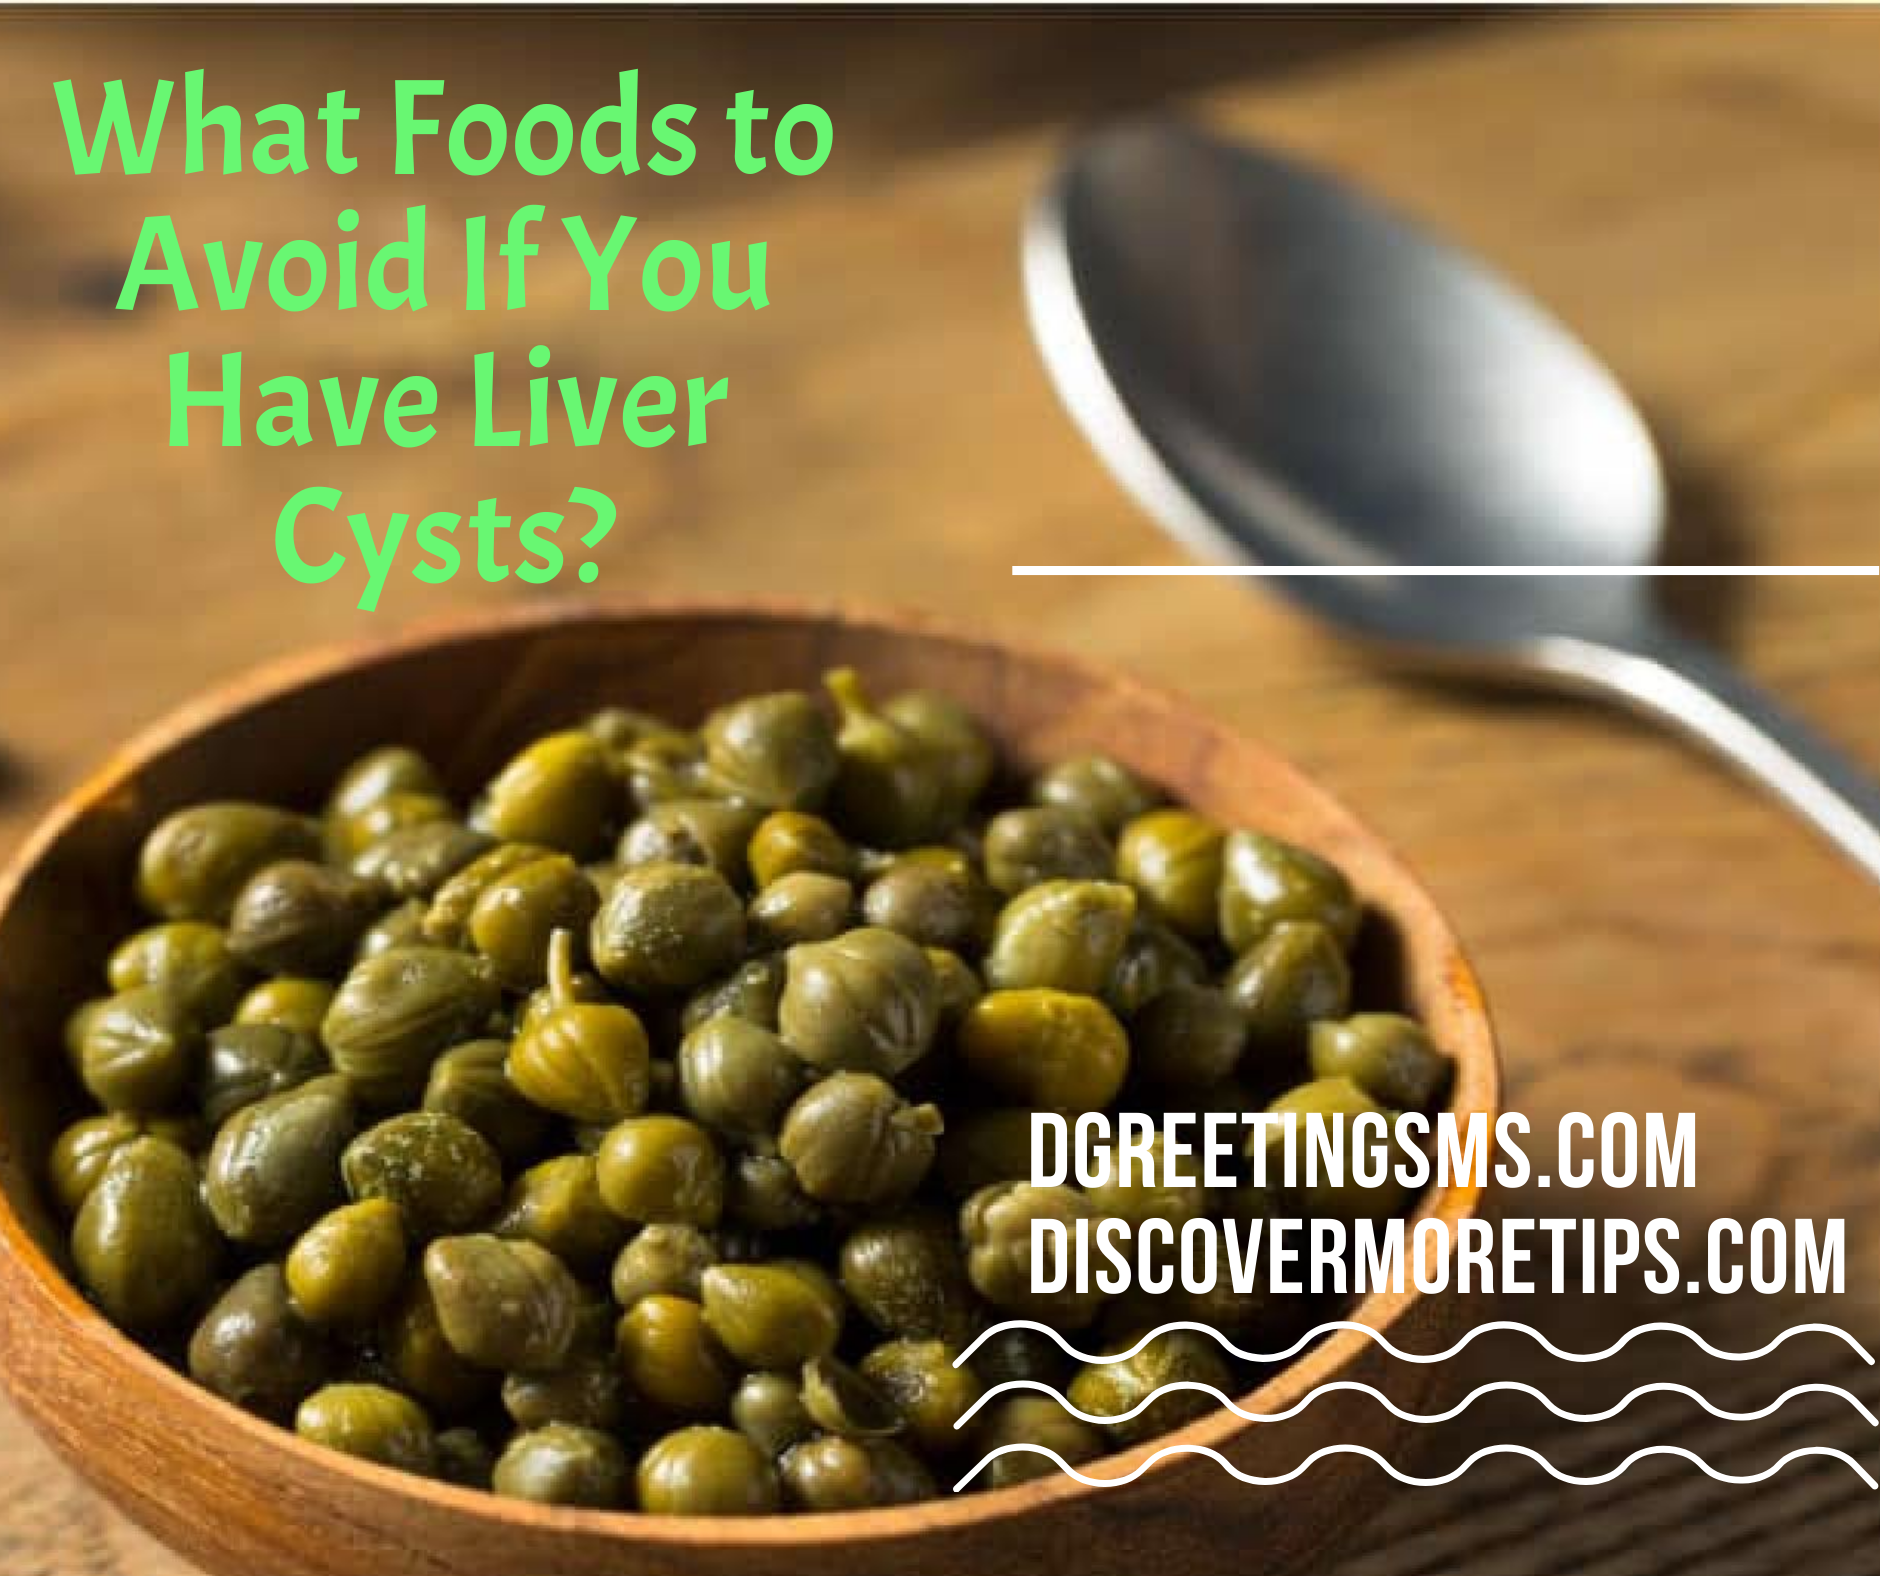 Are Pickled Capers Good for You?